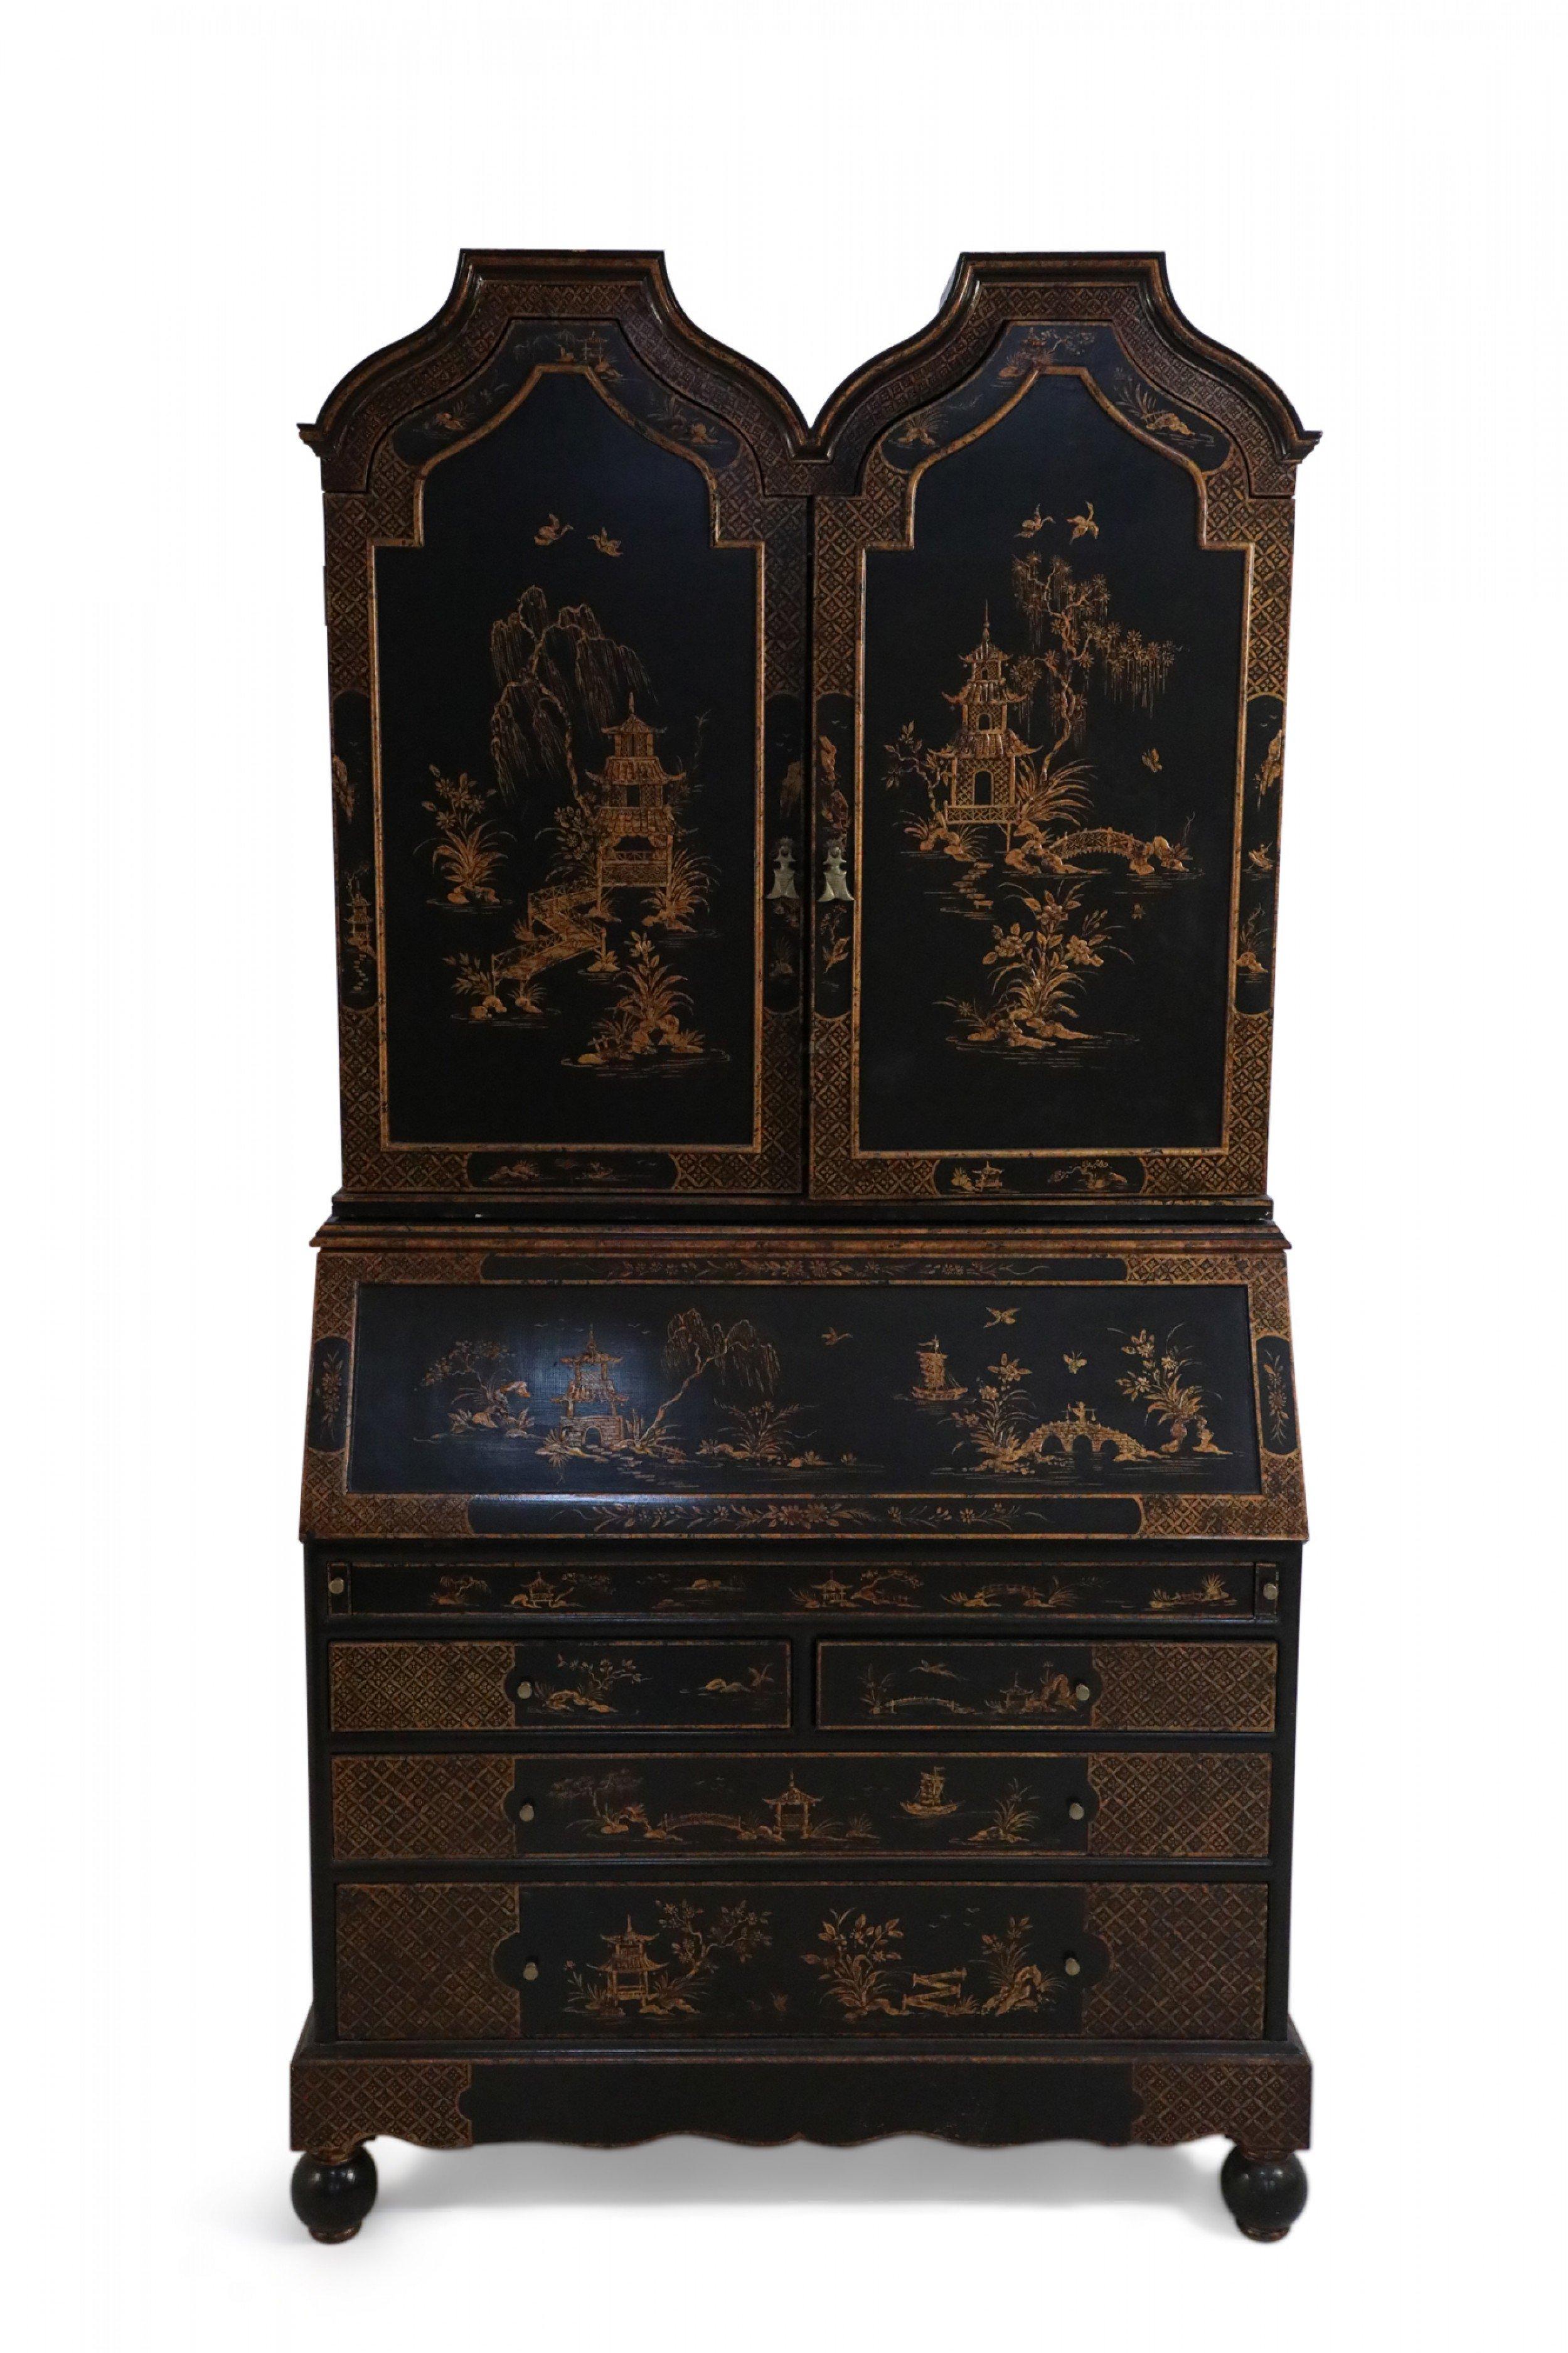 English Georgian-style black secretary desk painted in traditional gold Chinoiserie decorations of nature, bridges, pagodas, florals, boats and intricate patterns. Its fold-down writing surface is supported by two lopers and opens to reveal letter